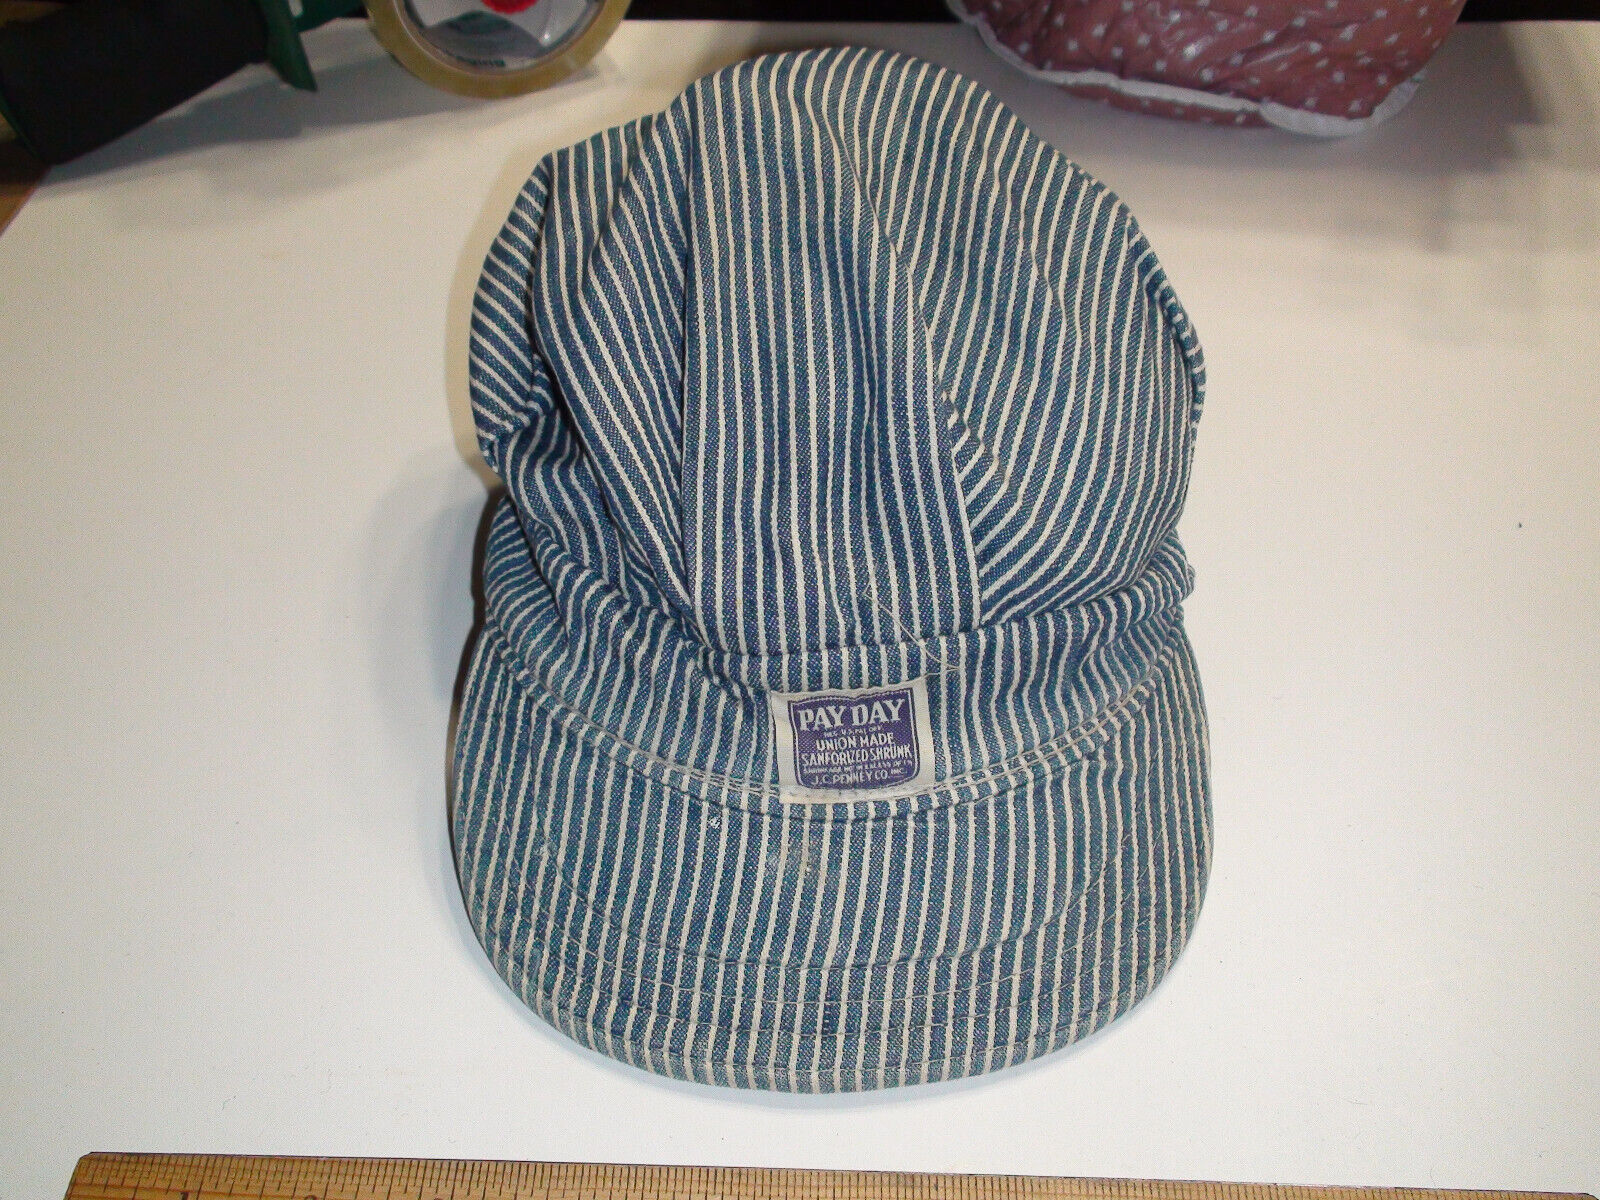 Vintage J.C. Penney Co. PAYDAY Conductor's Hat Cap Striped Union Made Sanforized